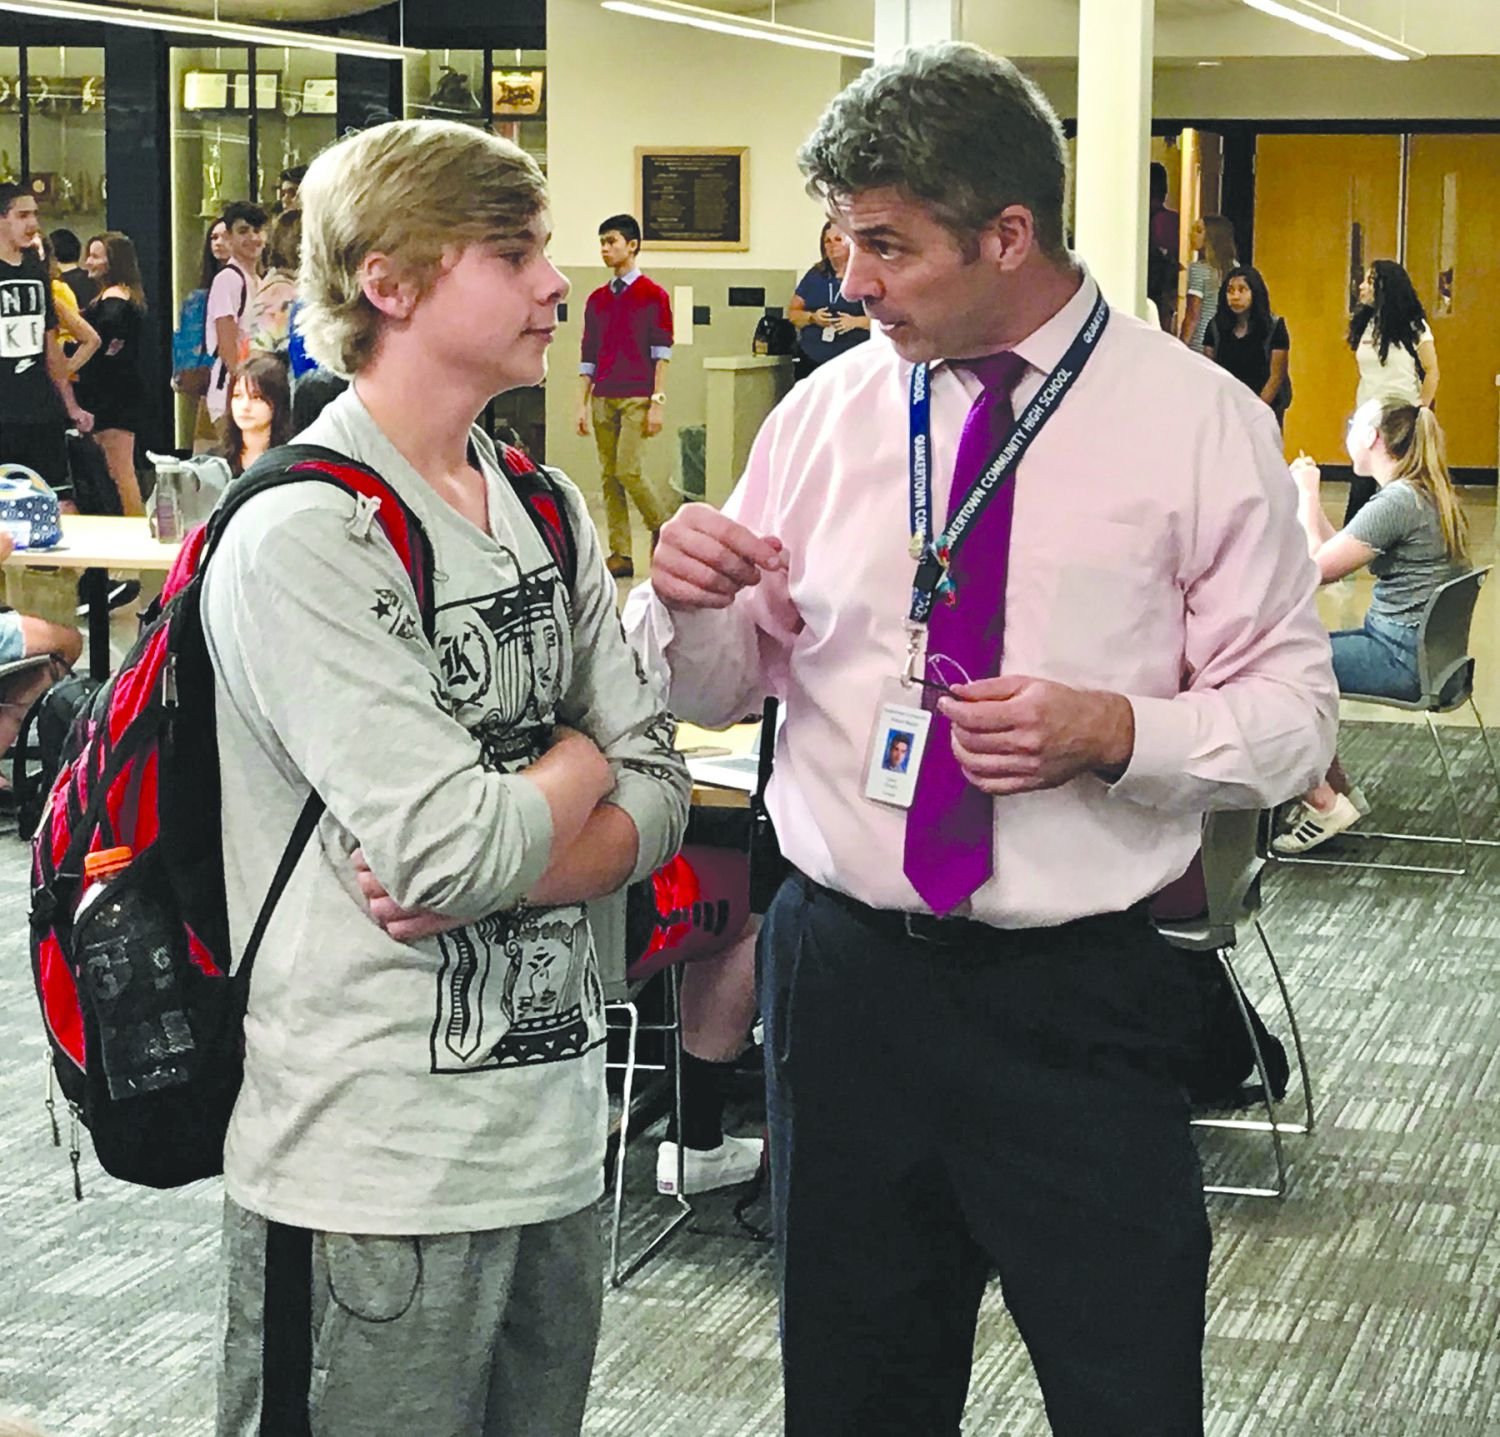 Dr. David Finnerty speaks to a student in the high school’s cyber commons area.